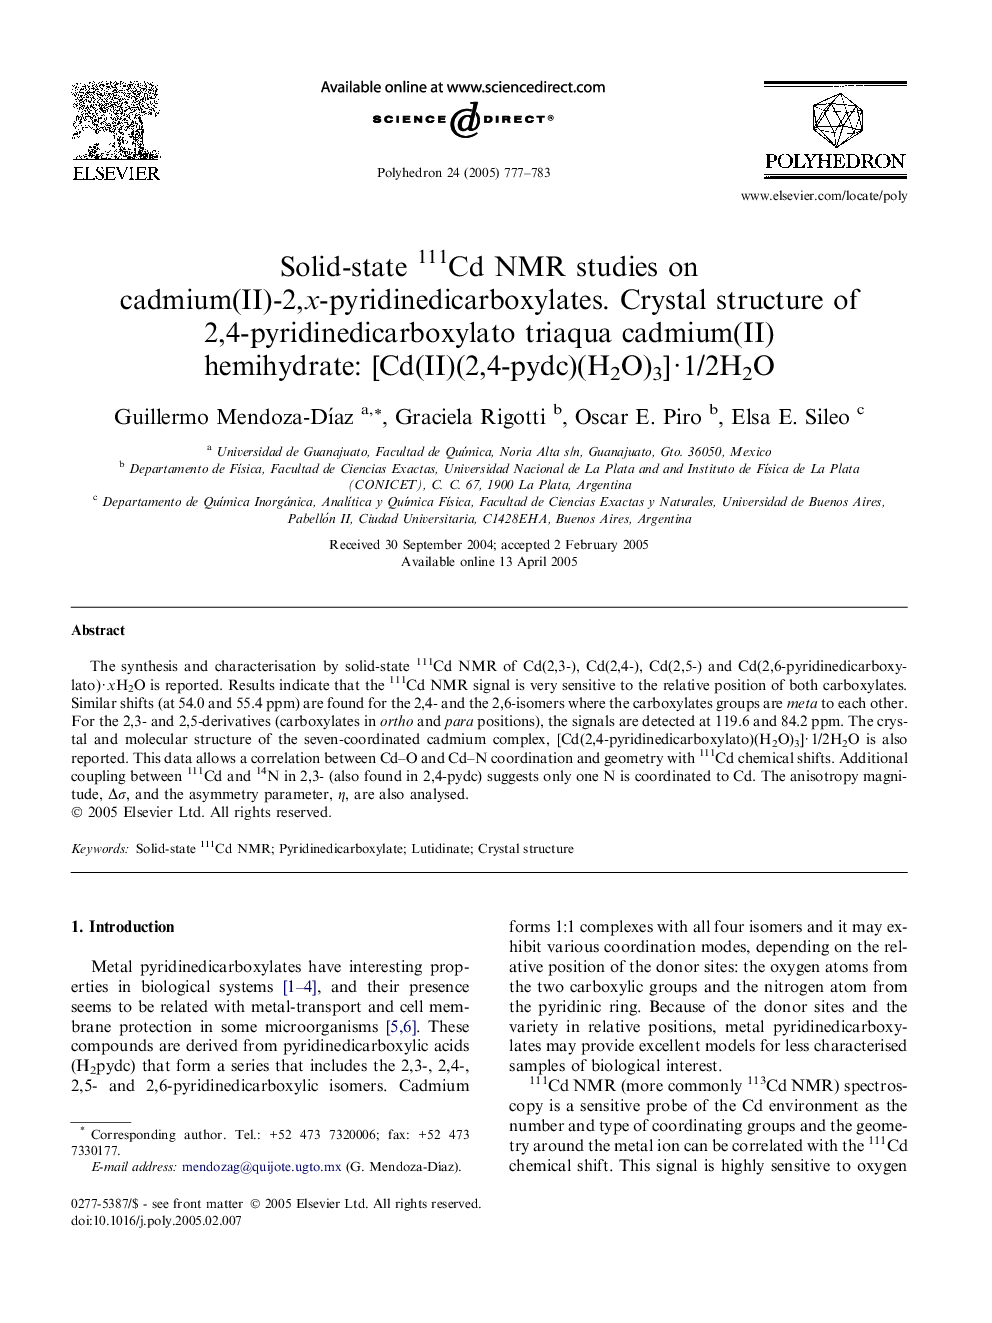 Solid-state 111Cd NMR studies on cadmium(II)-2,x-pyridinedicarboxylates. Crystal structure of 2,4-pyridinedicarboxylato triaqua cadmium(II) hemihydrate: [Cd(II)(2,4-pydc)(H2O)3]Â Â·Â 1/2H2O